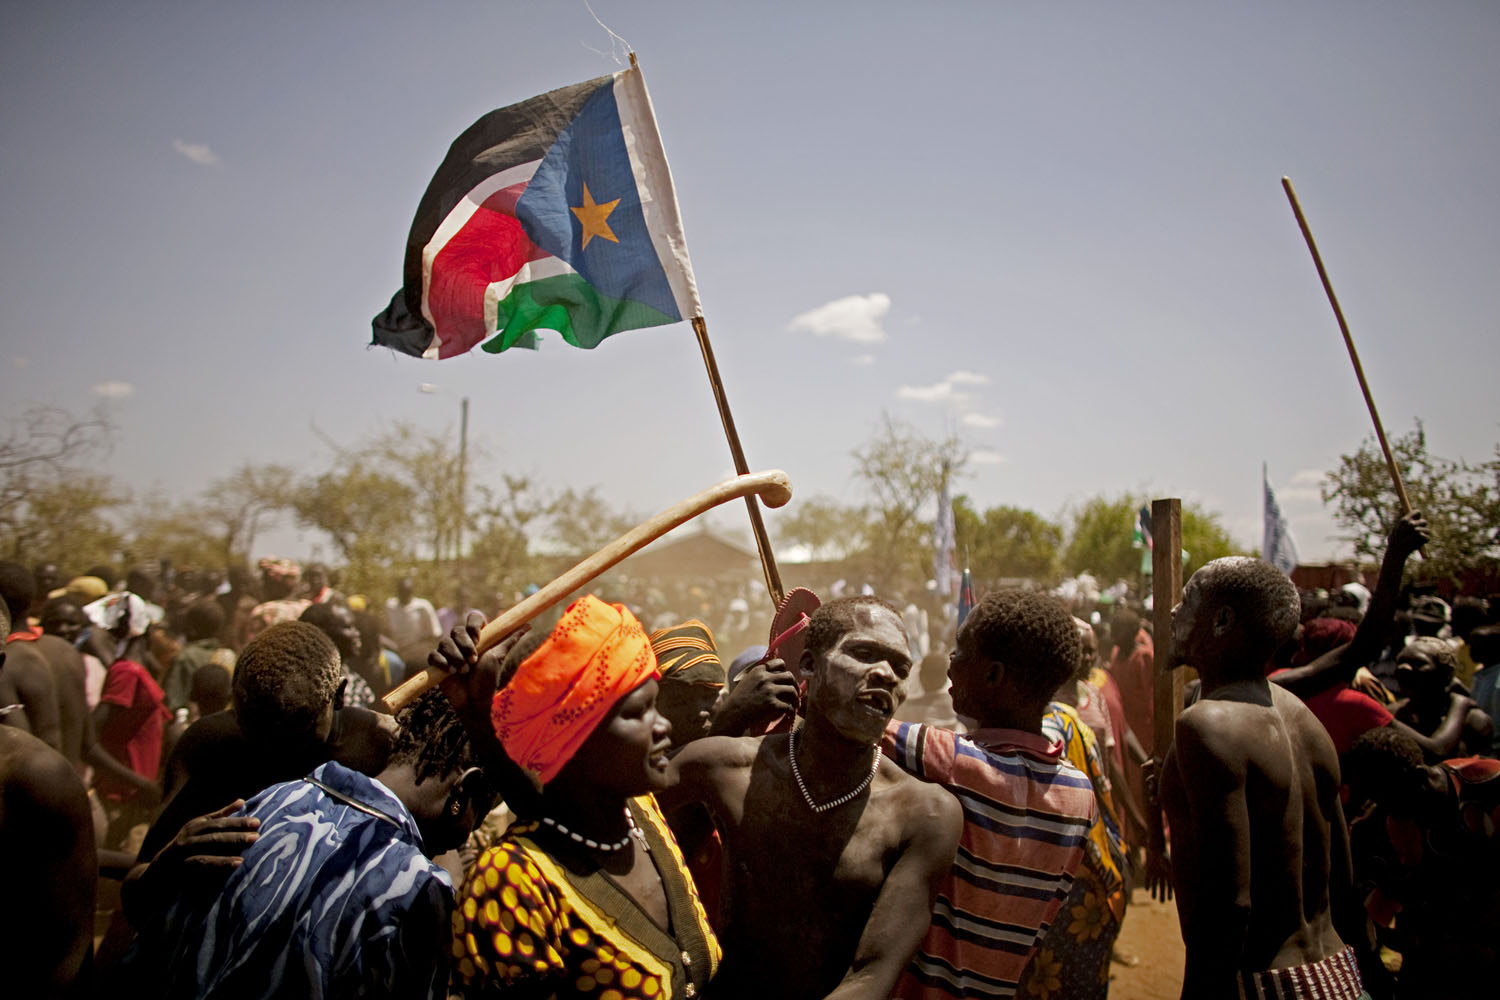 Southern Sudanese from the pastoralist Taposa tribe take part in a nationalist celebration in the remote area of Kapoeta. Support for southern independence is strong even among groups in the most desolate areas.